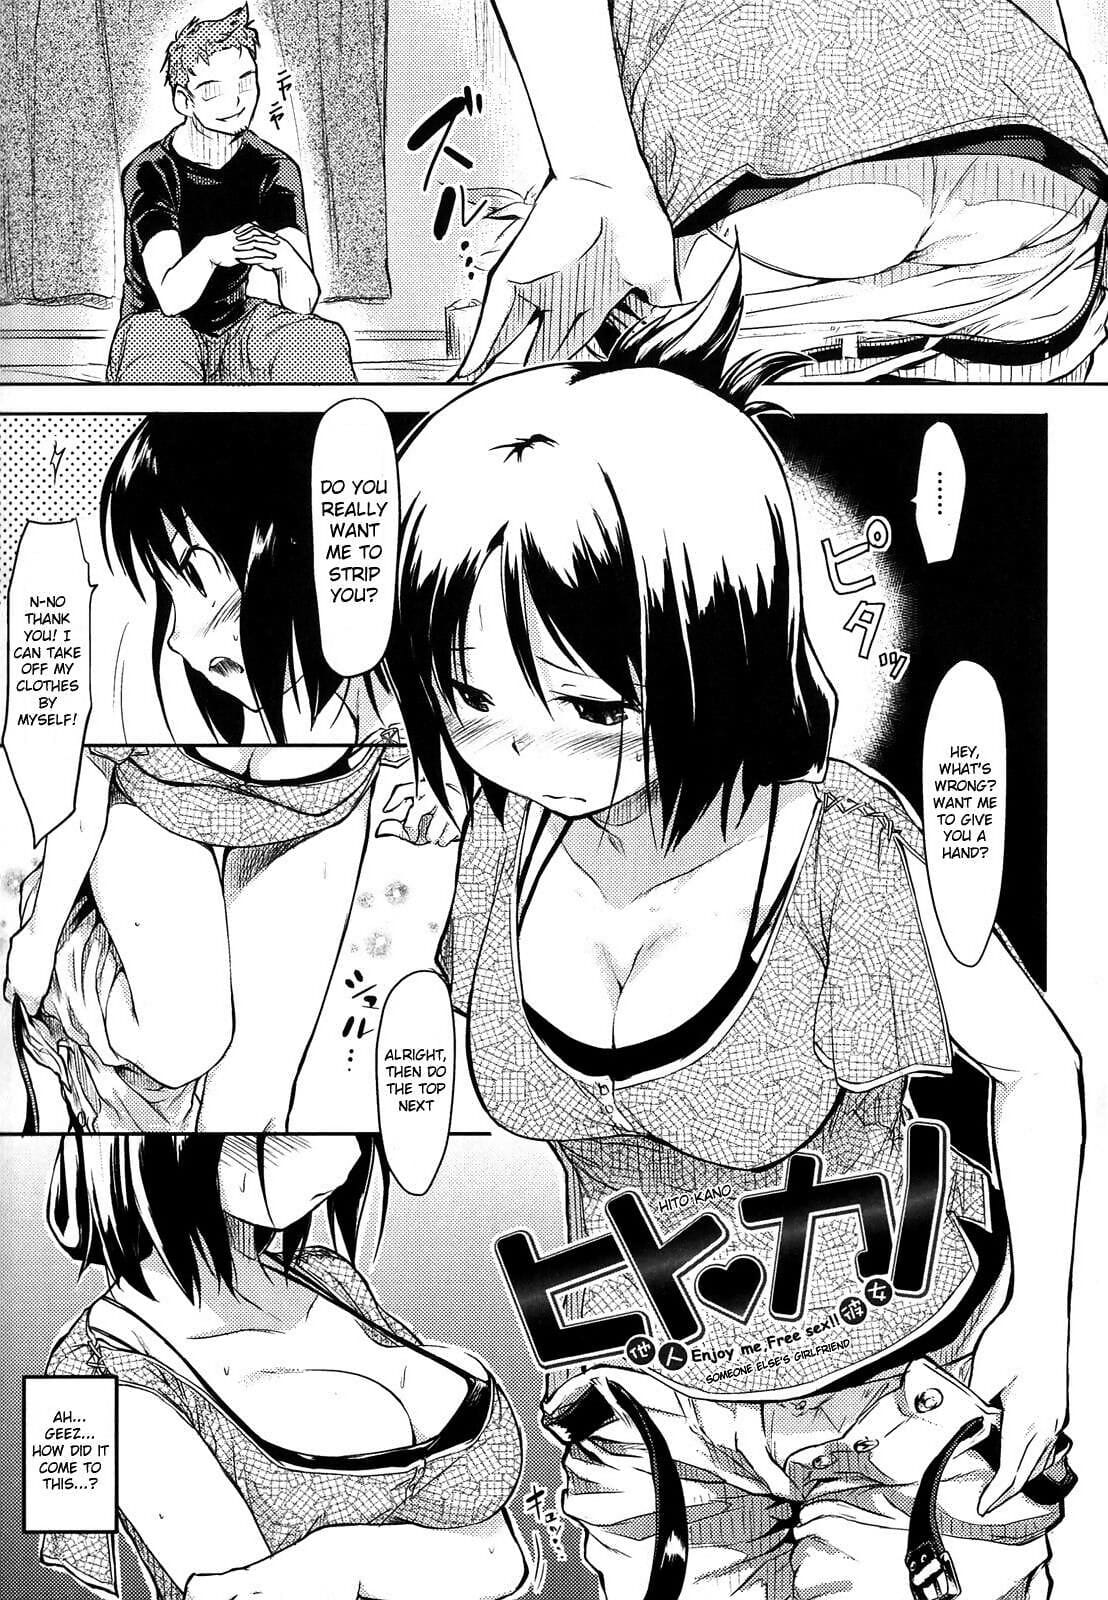 Hito Kano - Tanin Kanojo - Someone Elses Girlfriend + After page 1